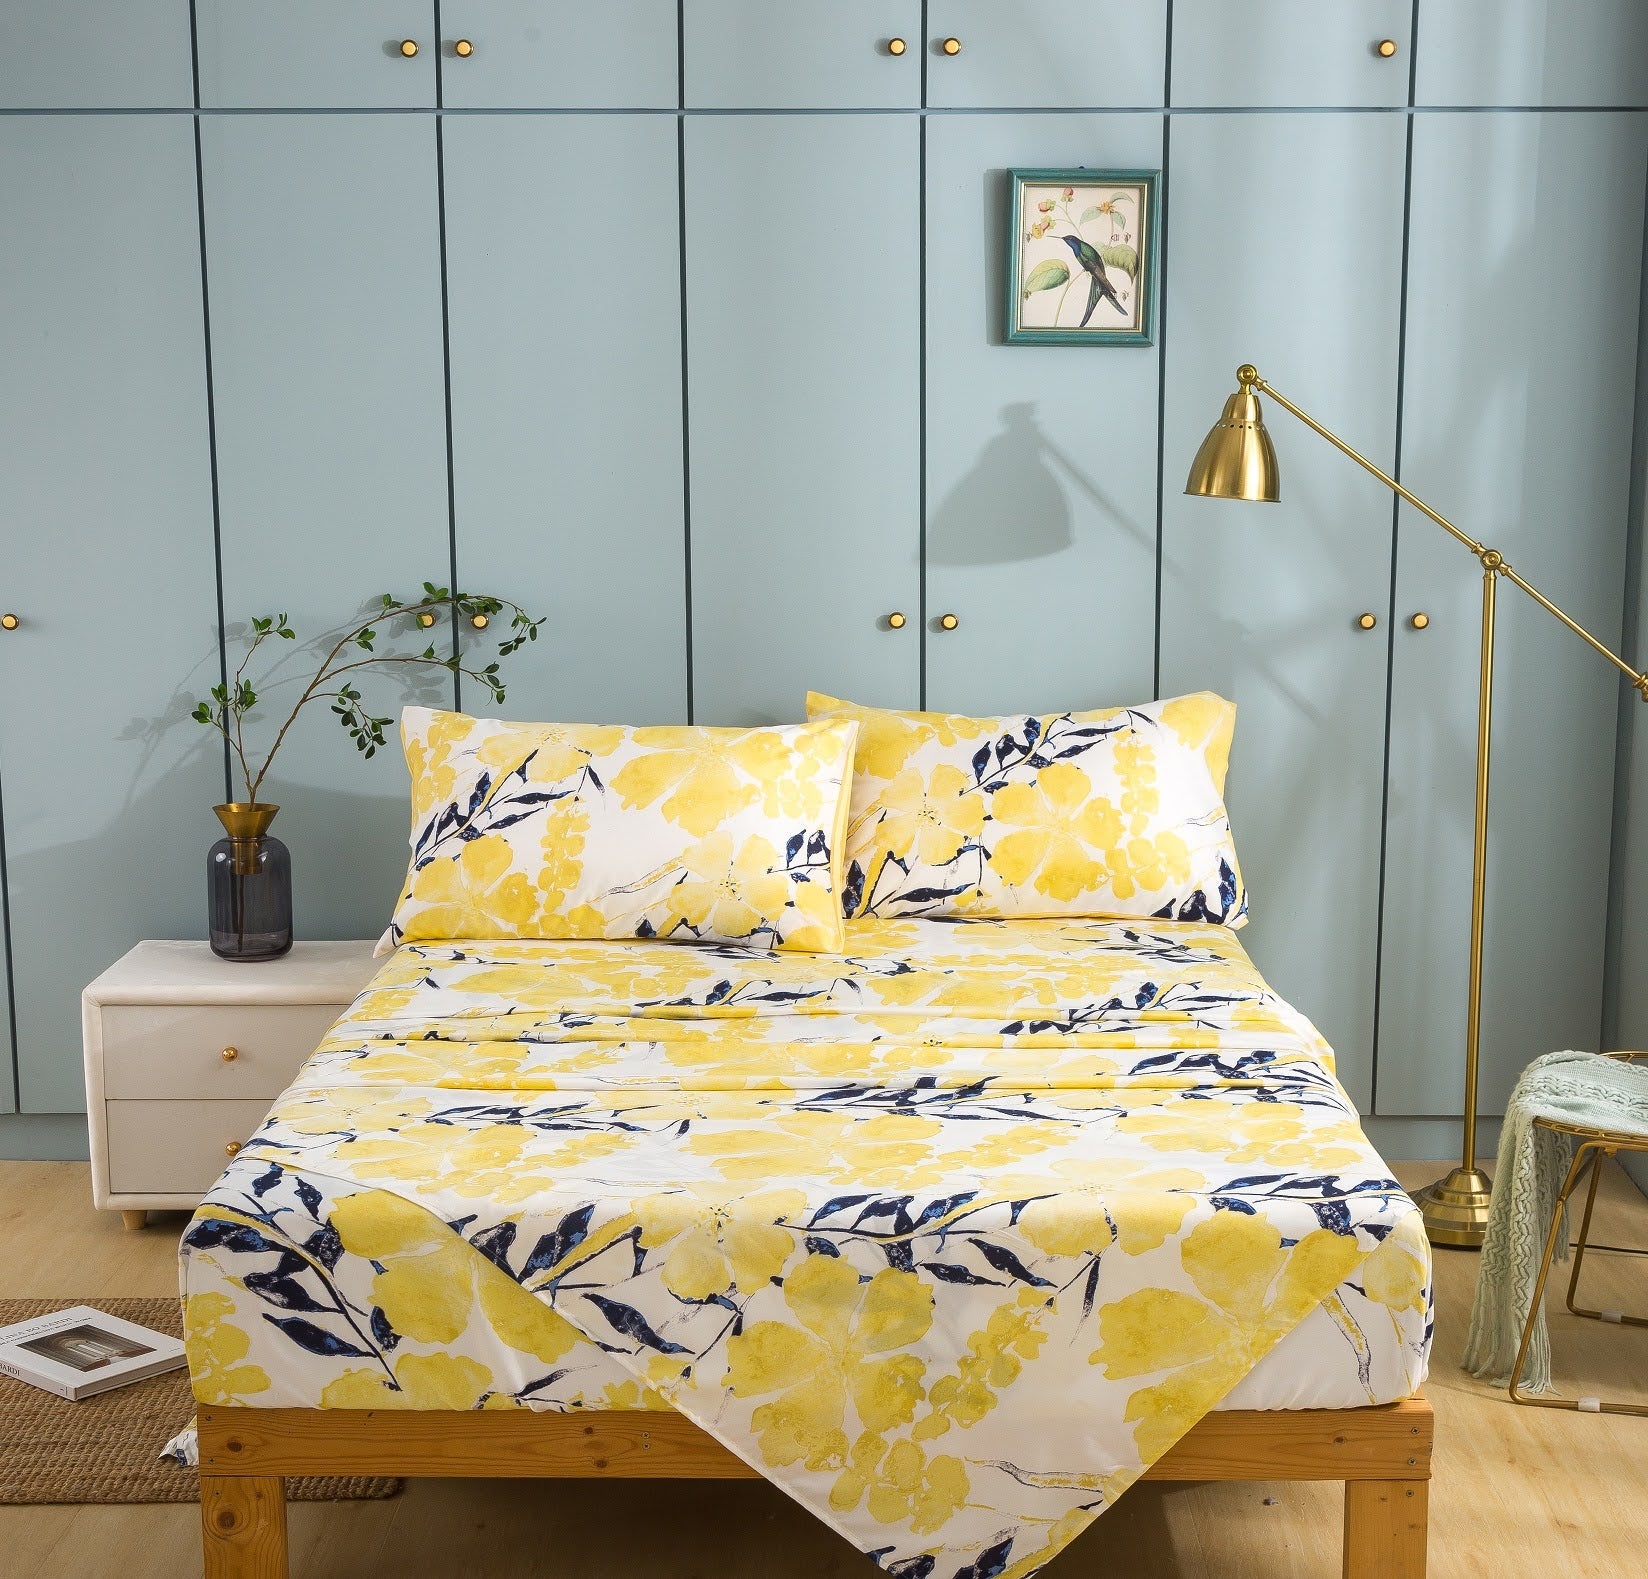 Buttercup bright yellow leaf pattern sheets on bed. click to view all bed sheets. light yellow blue floral leaves printed pattern print fitted flat to sheet. small business online shopping 